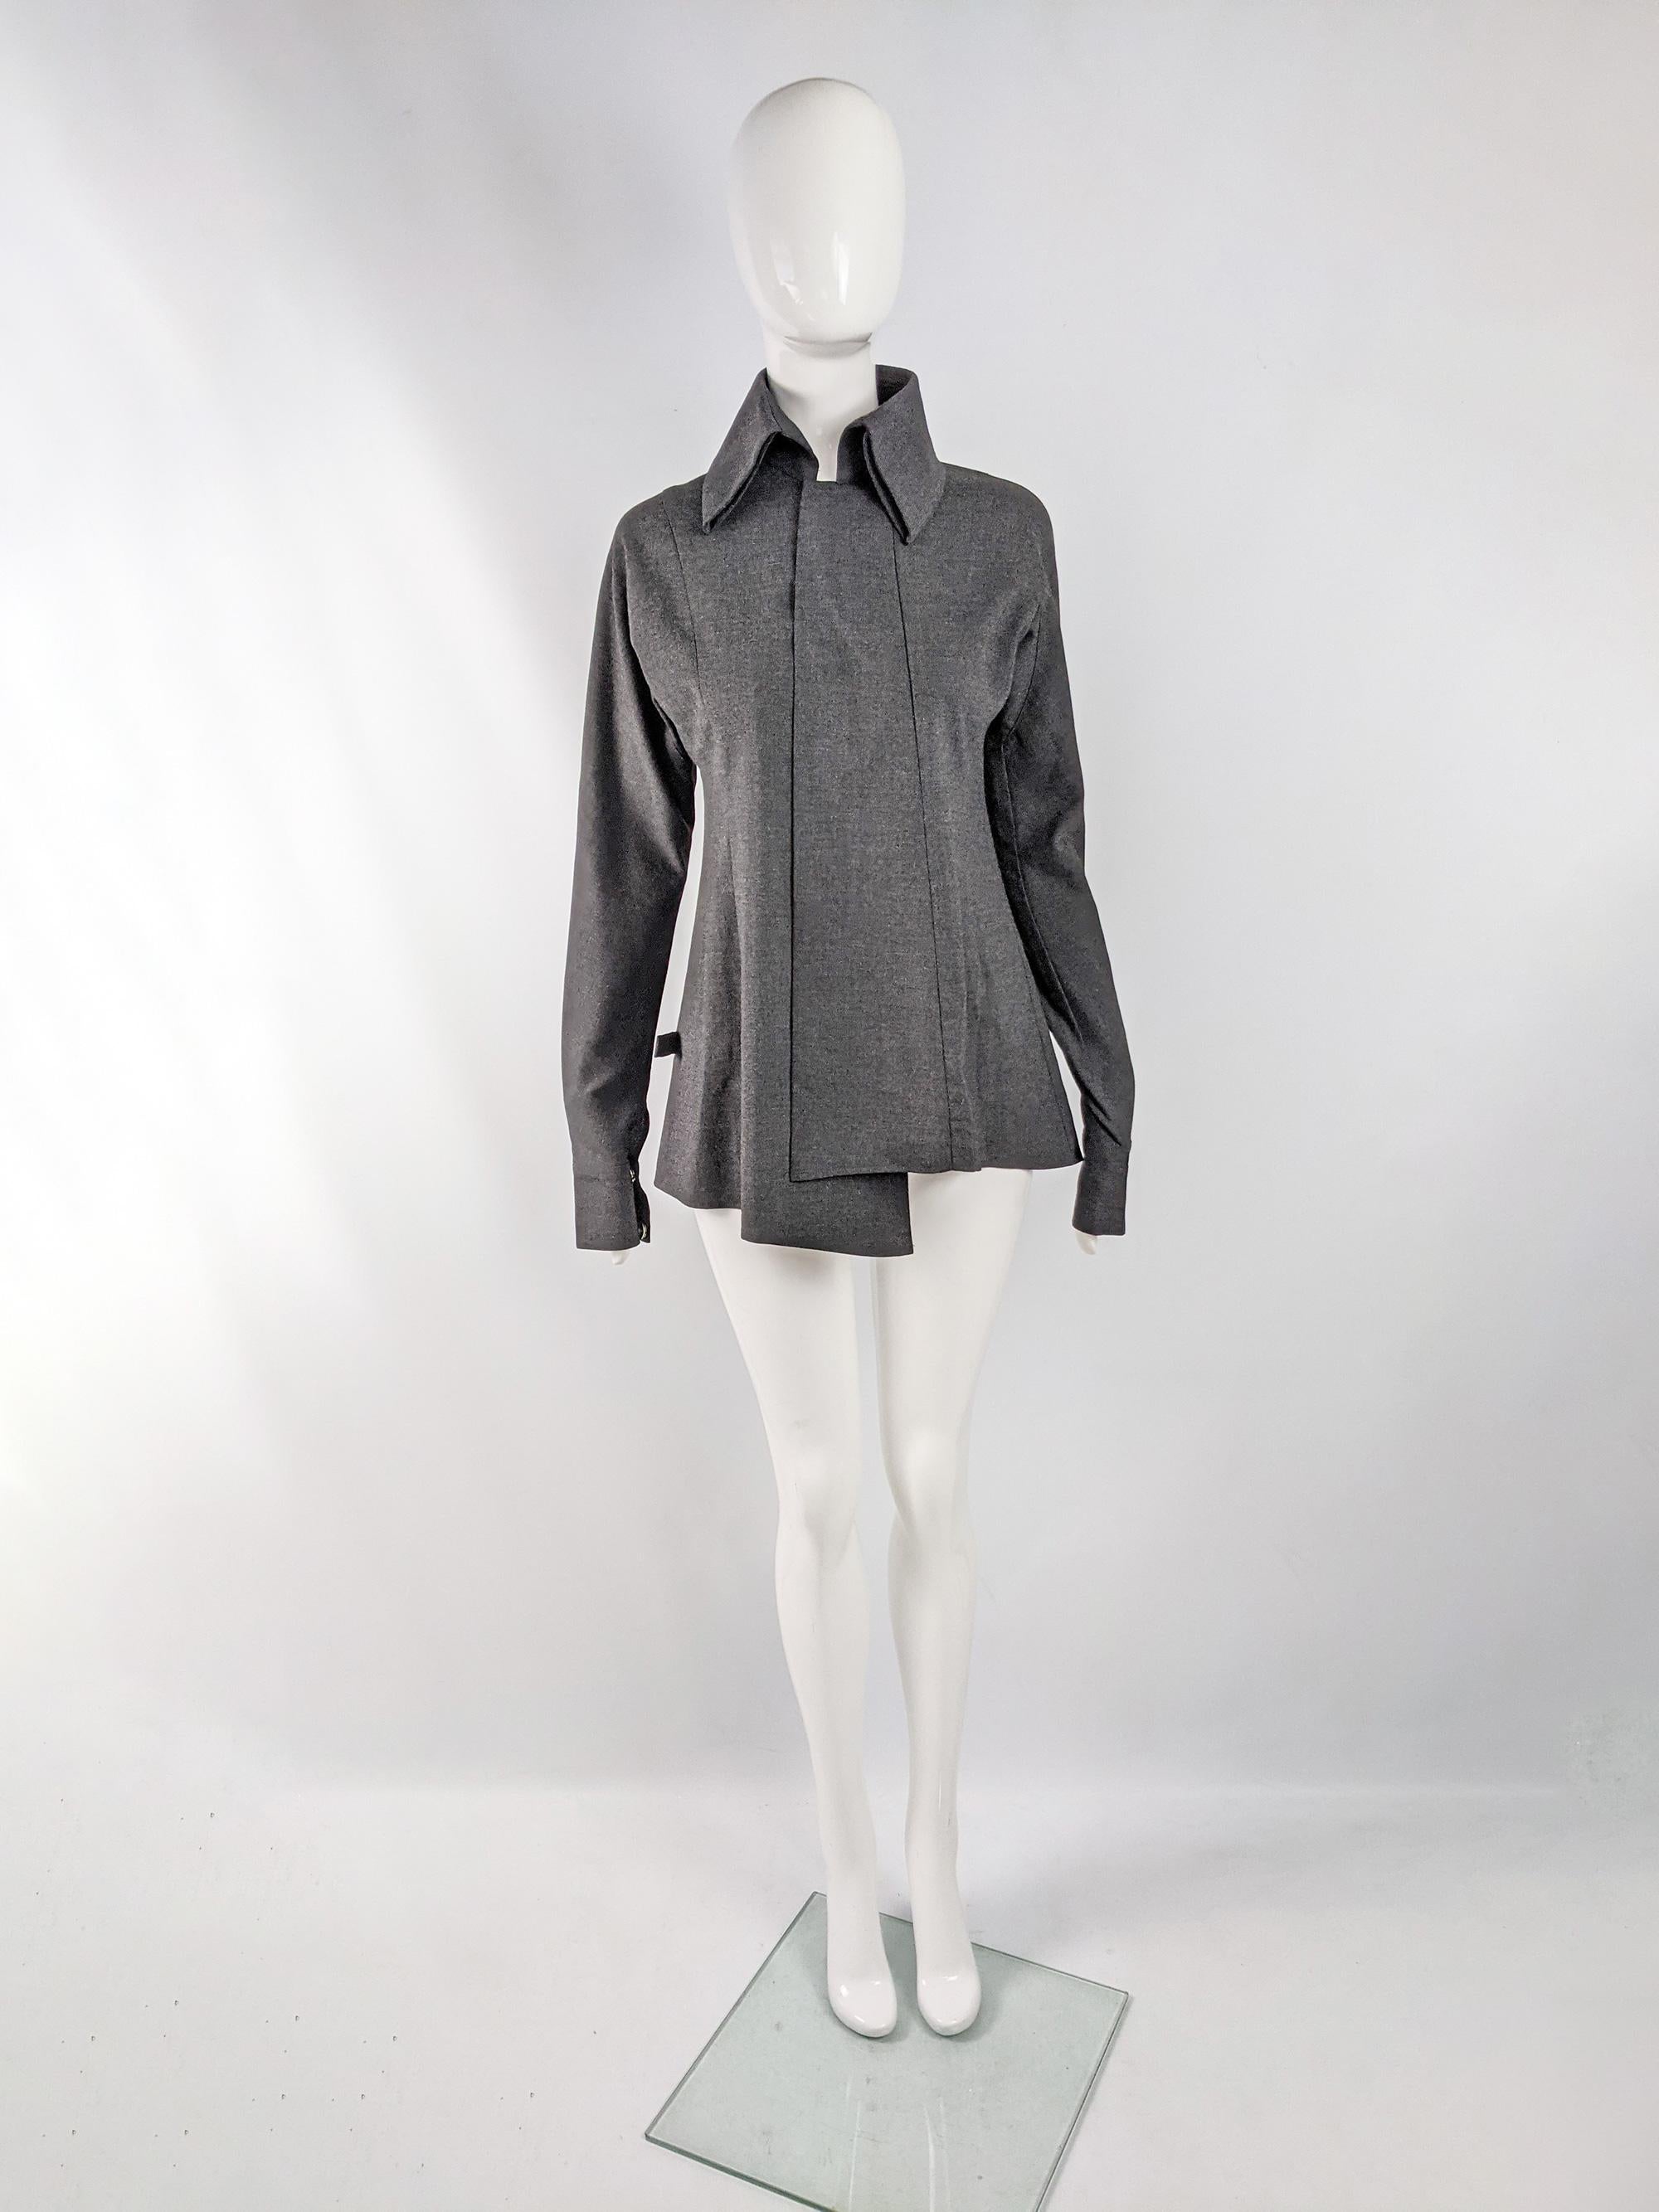 An amazing and rare vintage womens shirt / lightweight jacket from 1998 by cult Japanese designer, Shuhei Ogawa. Made in Japan from a charcoal grey fabric, it has popper buttons down the front which gives a clean, minimalist look. The cut is very